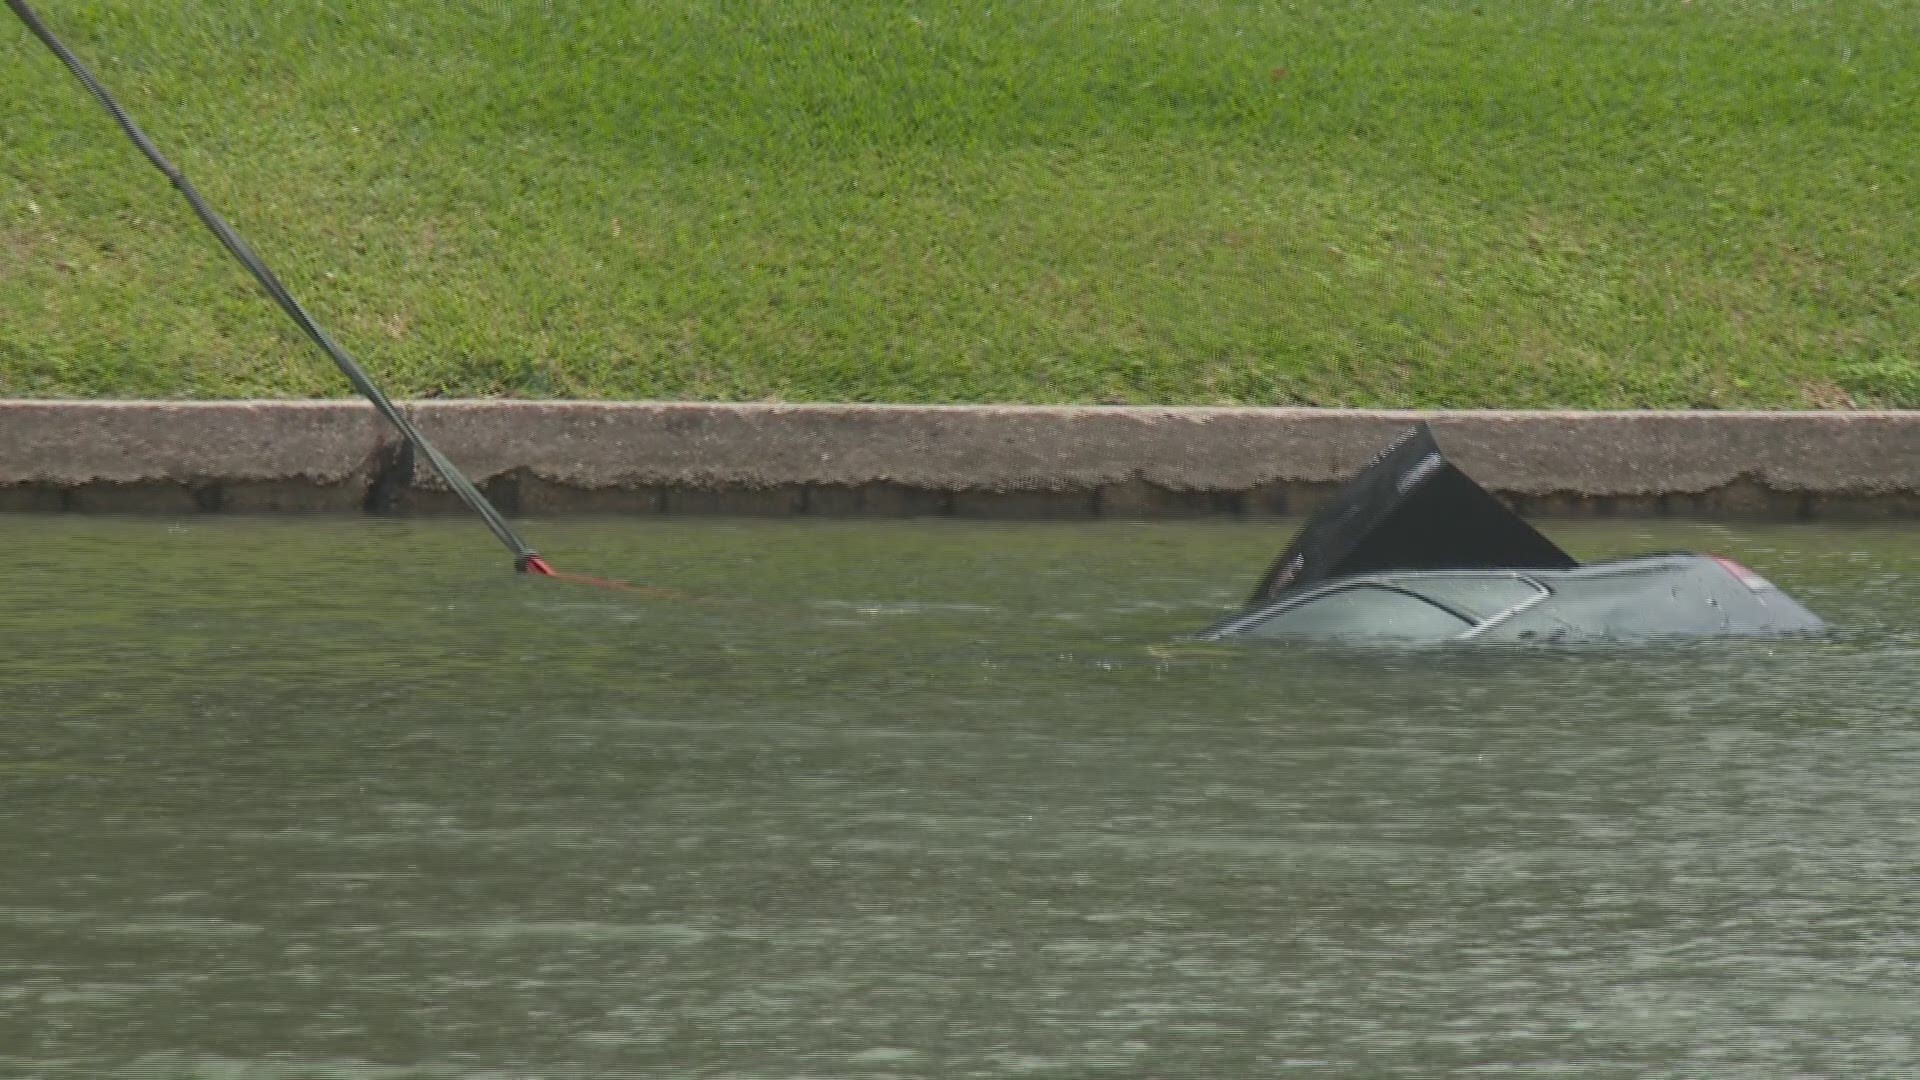 The NOPD searched for and then removed a car from Bayou St. John Monday after a report that a vehicle had one into the water. There was no one inside.